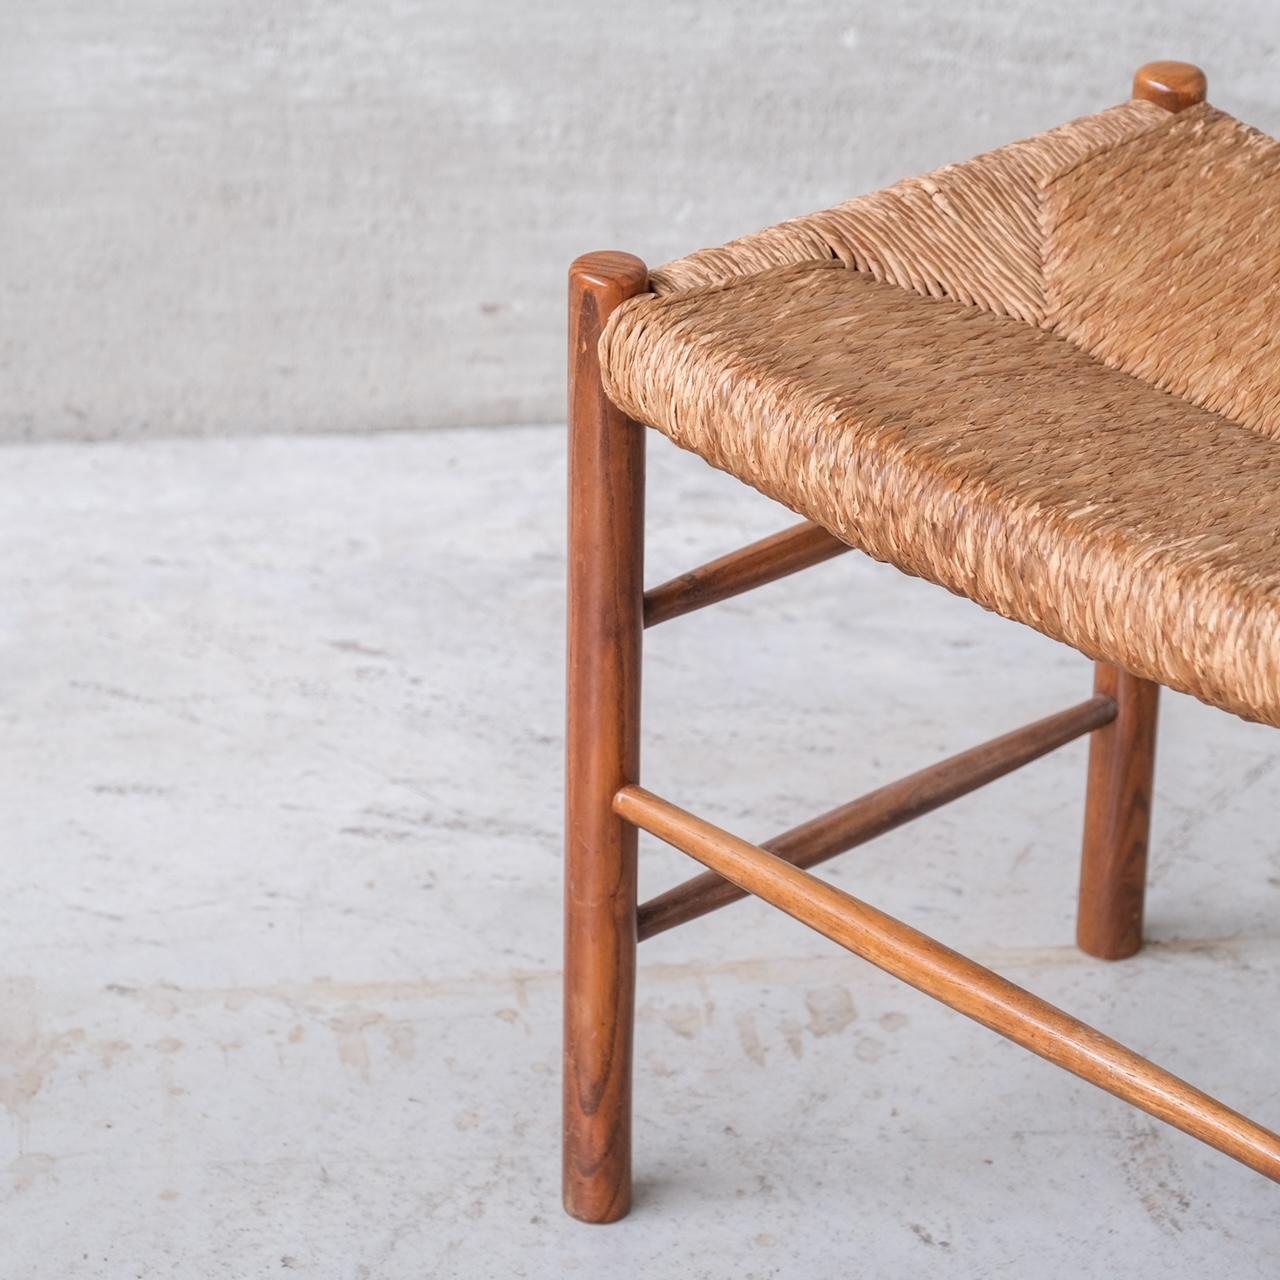 A scarce stool in rush and wood, Charlotte Perriand 'Dordogne' model, typically presented in dining chair form.

A single available which came with a wider set of dining chairs.

Scarce.

France, c1950s.

Good vintage condition, some scuffs and wear